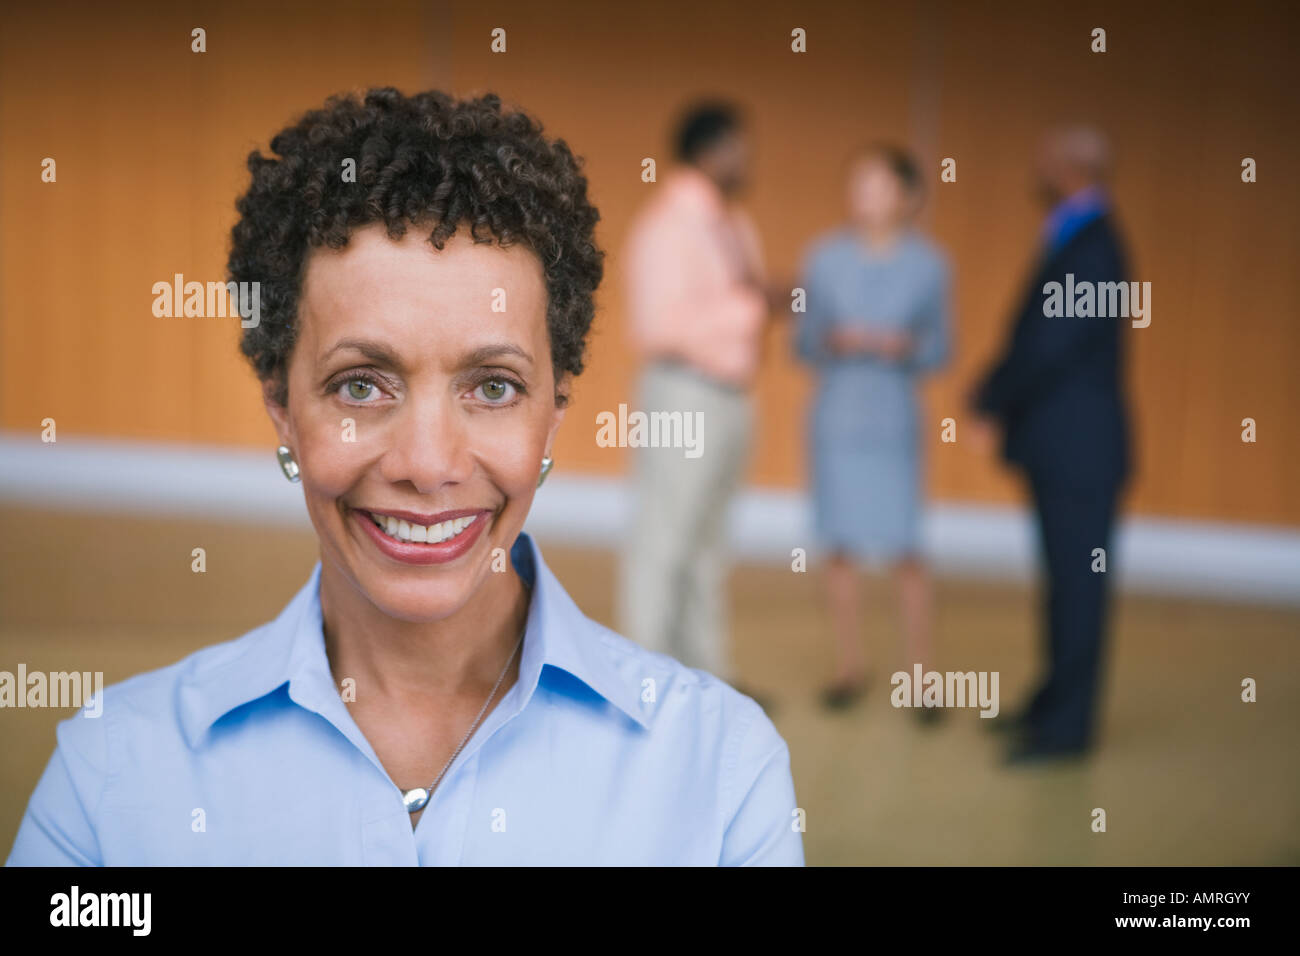 African businesswoman in front of coworkers Stock Photo